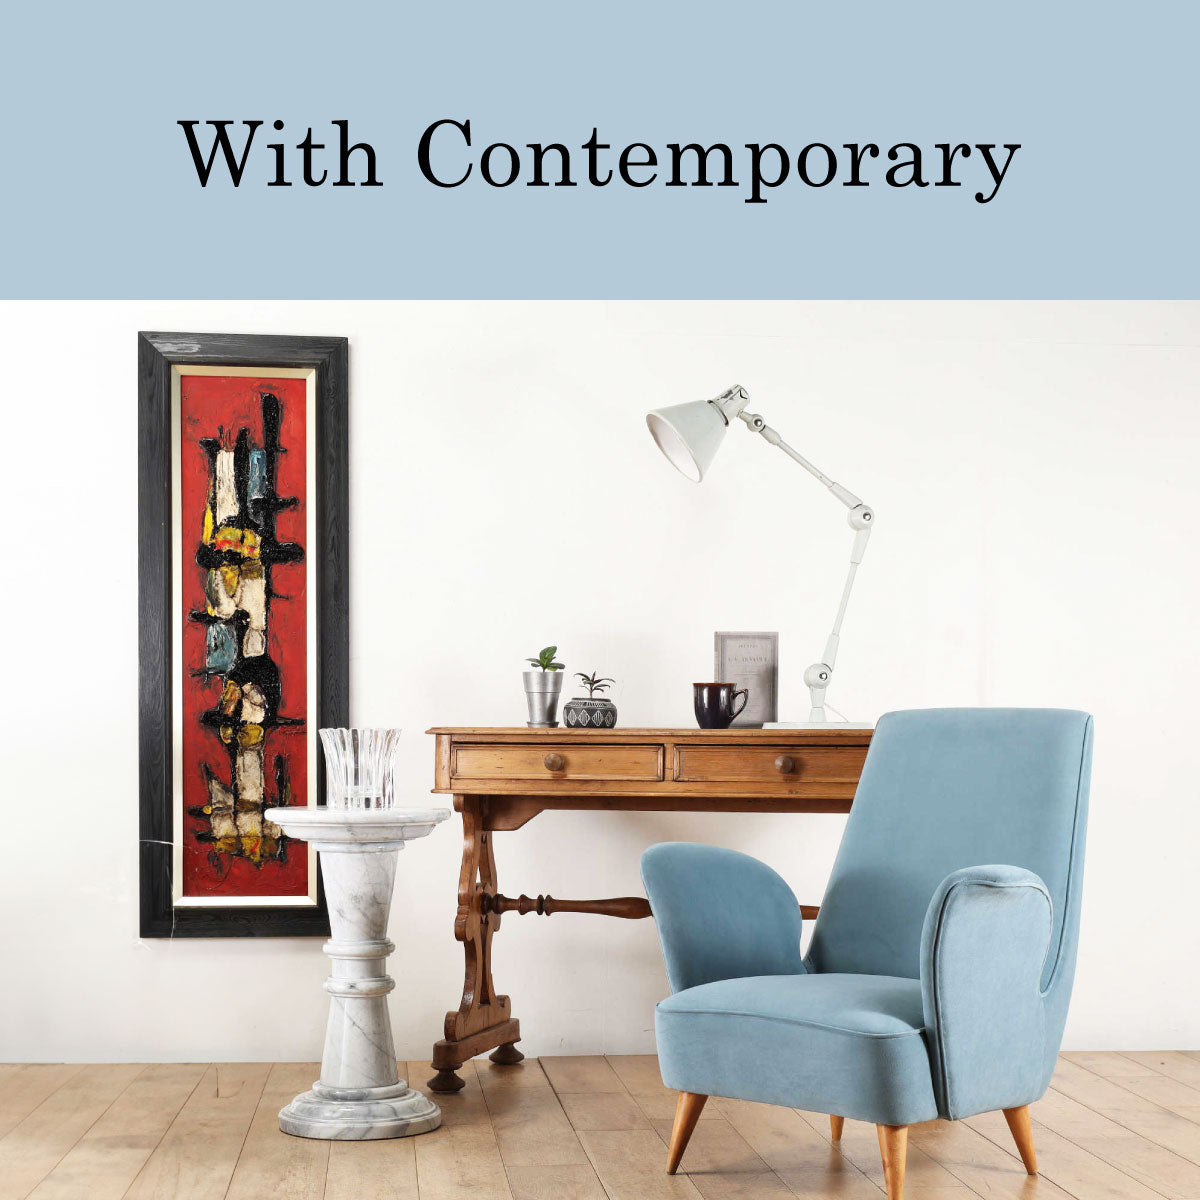 With Contemporary